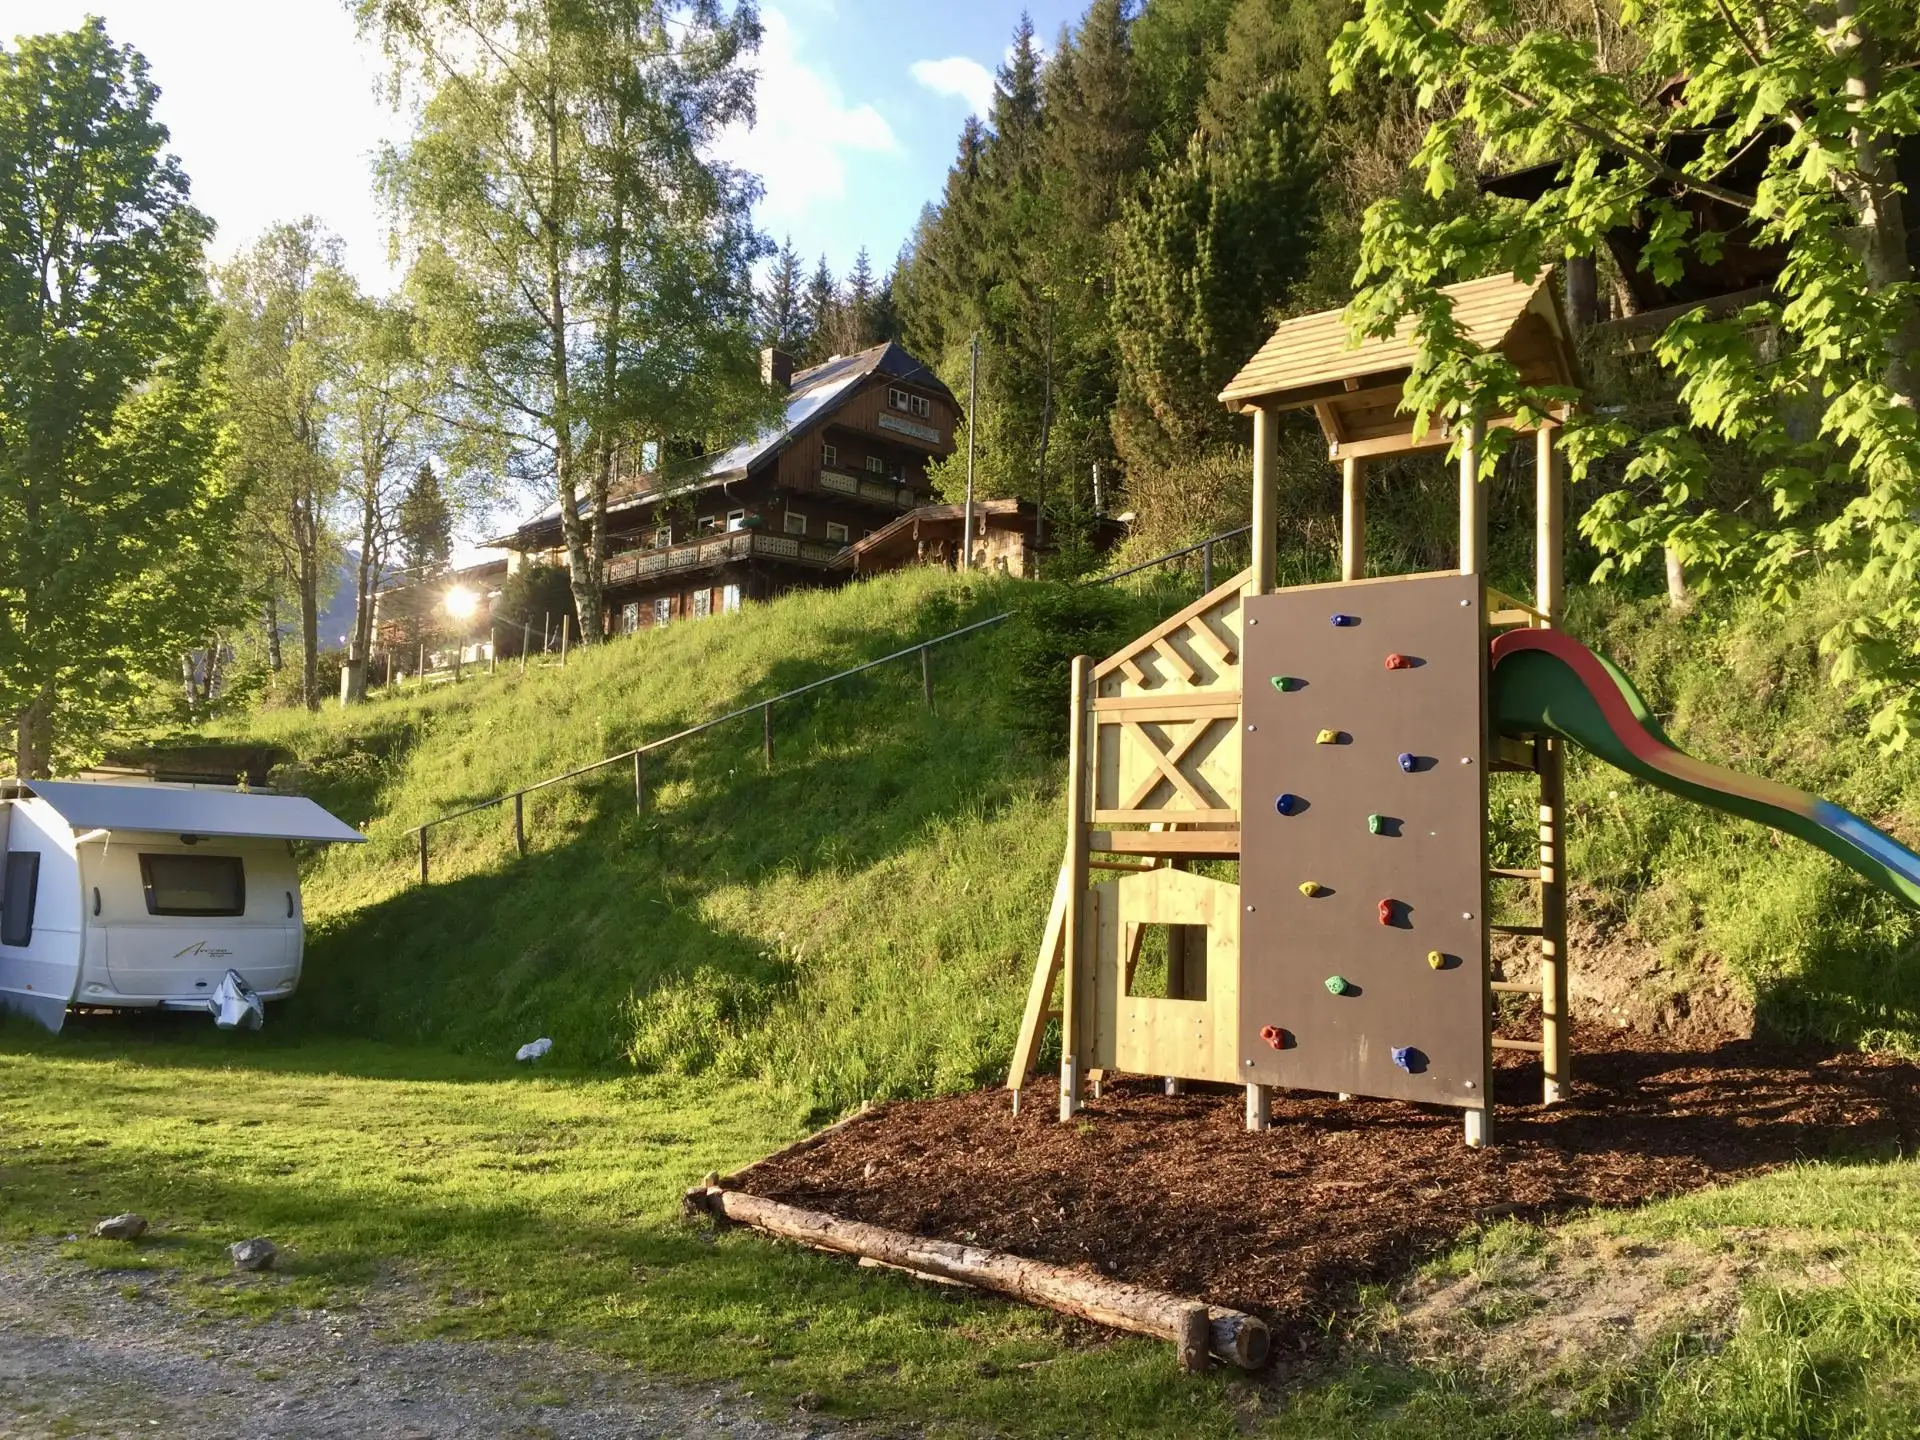 Camping Dachstein und Pension Gsenger #Camping